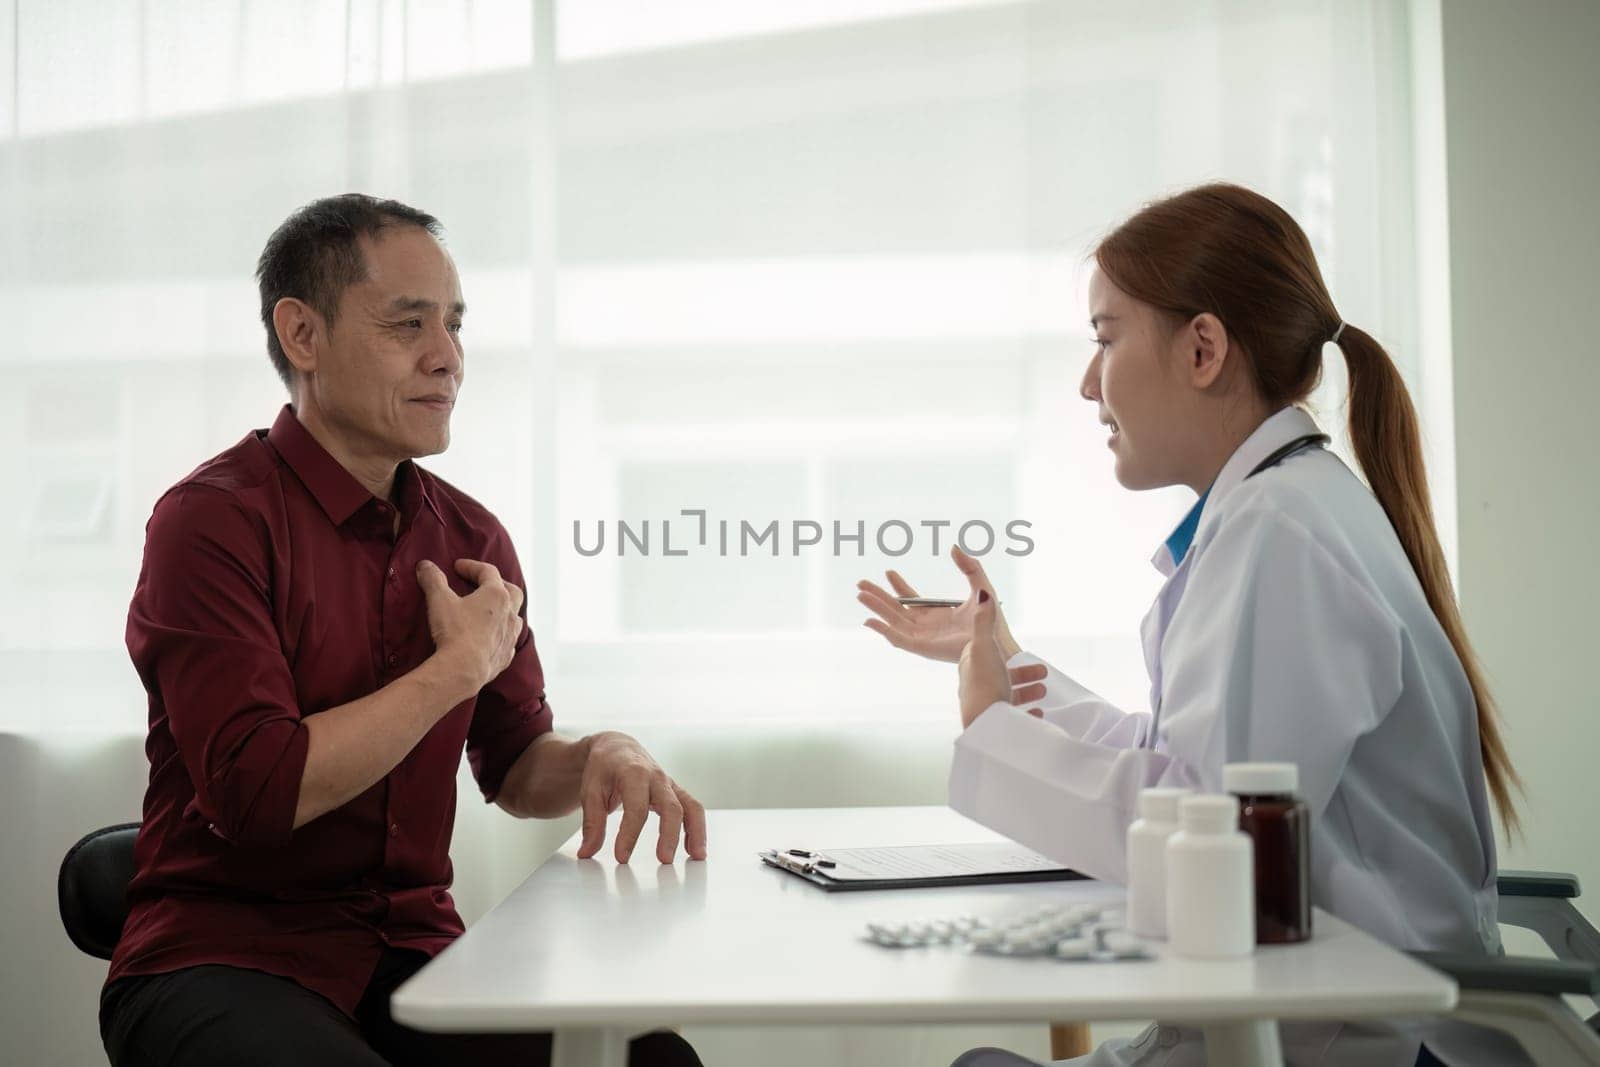 Doctor young woman white coat giving medical consultation to male elderly mature patient, discussing healthcare treatment or health test results at hospital.